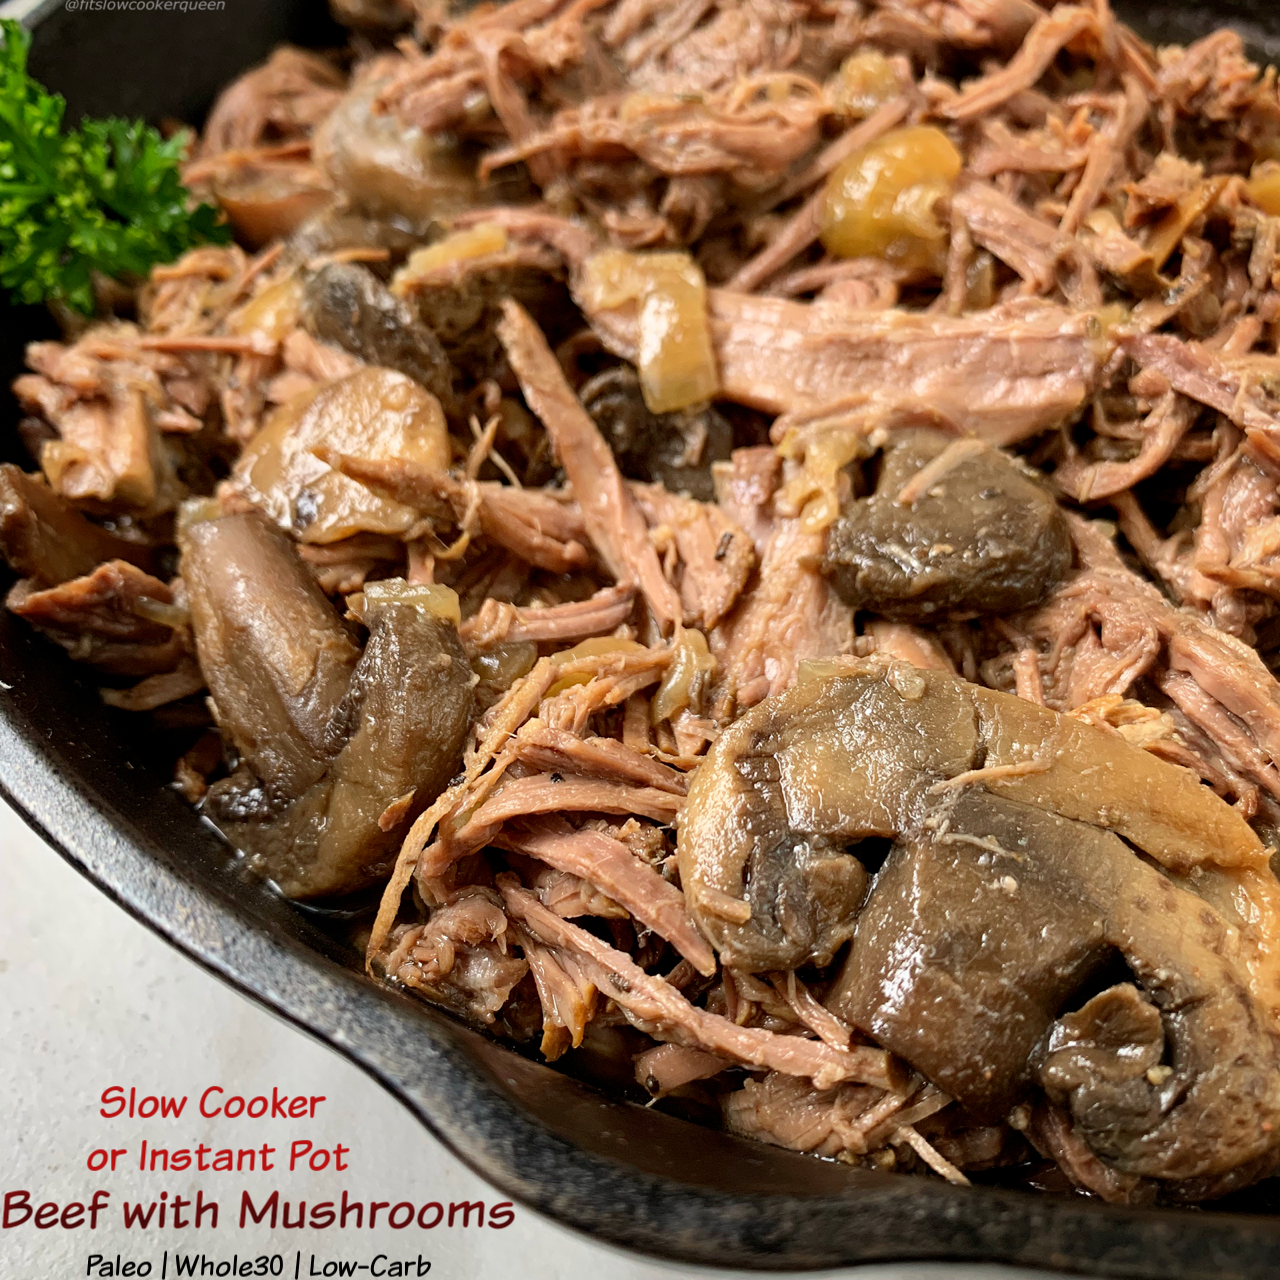 https://fitslowcookerqueen.com/wp-content/uploads/2018/10/Slow-Cooker-Beef-with-Mushrooms-PaleoWhole30Low-Carb-2-cover2.png